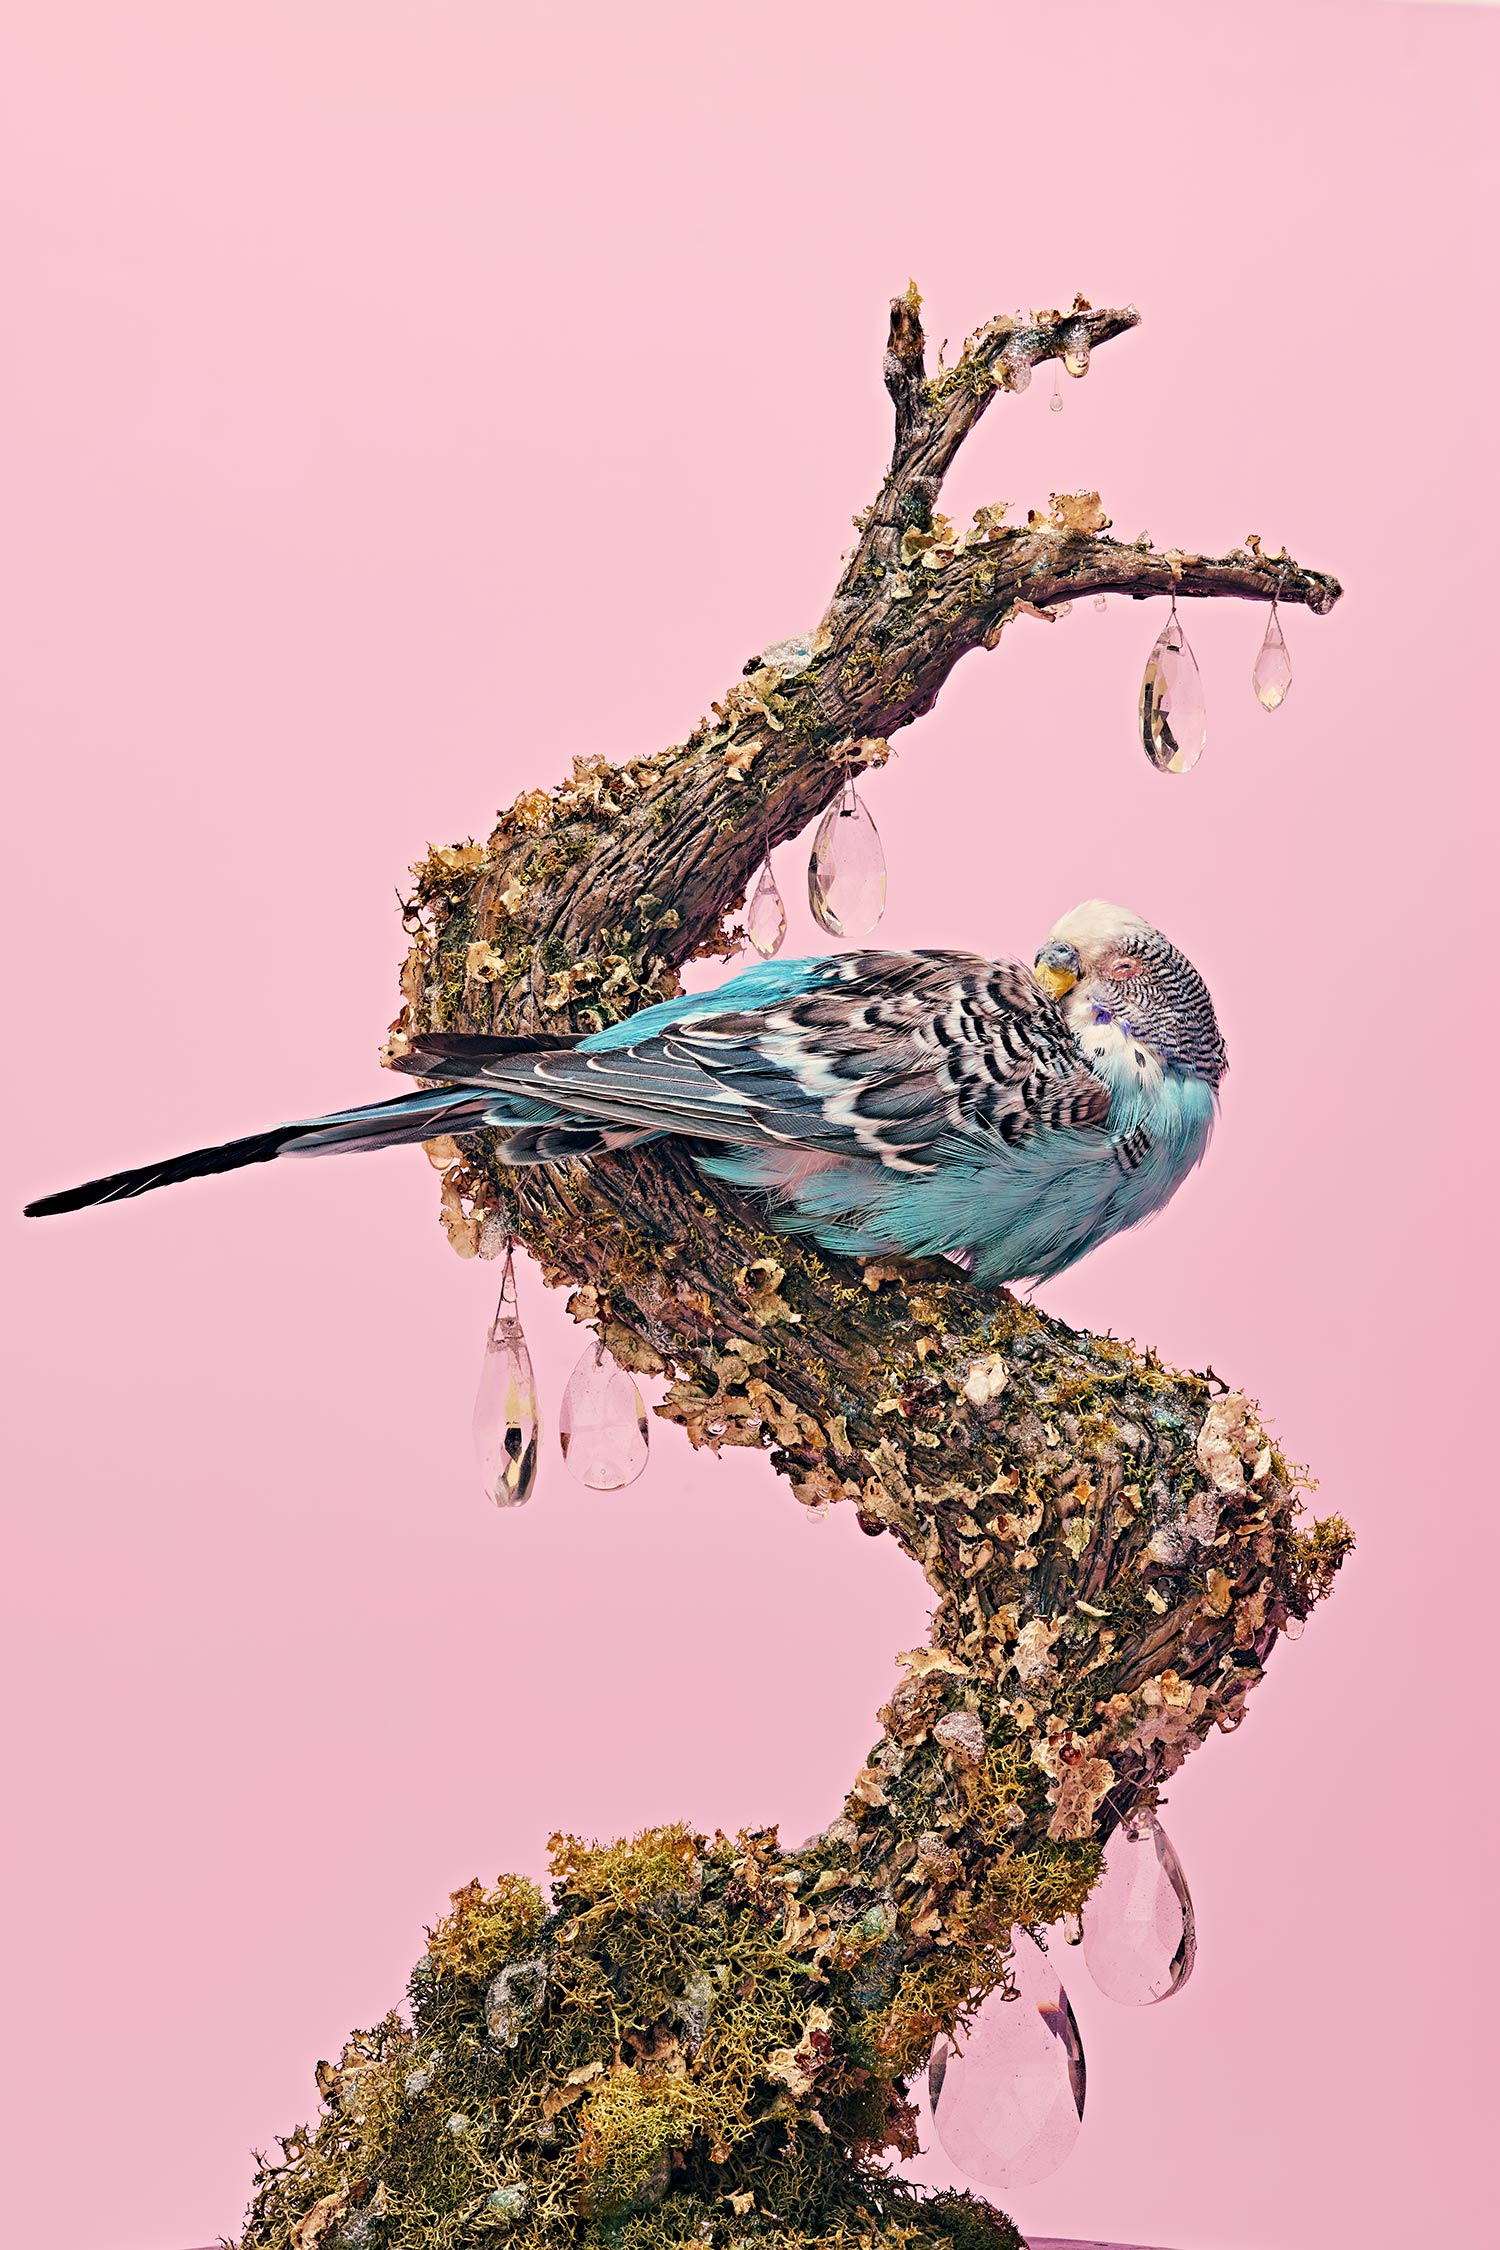 taxidermied budgie parakeet sits on branch